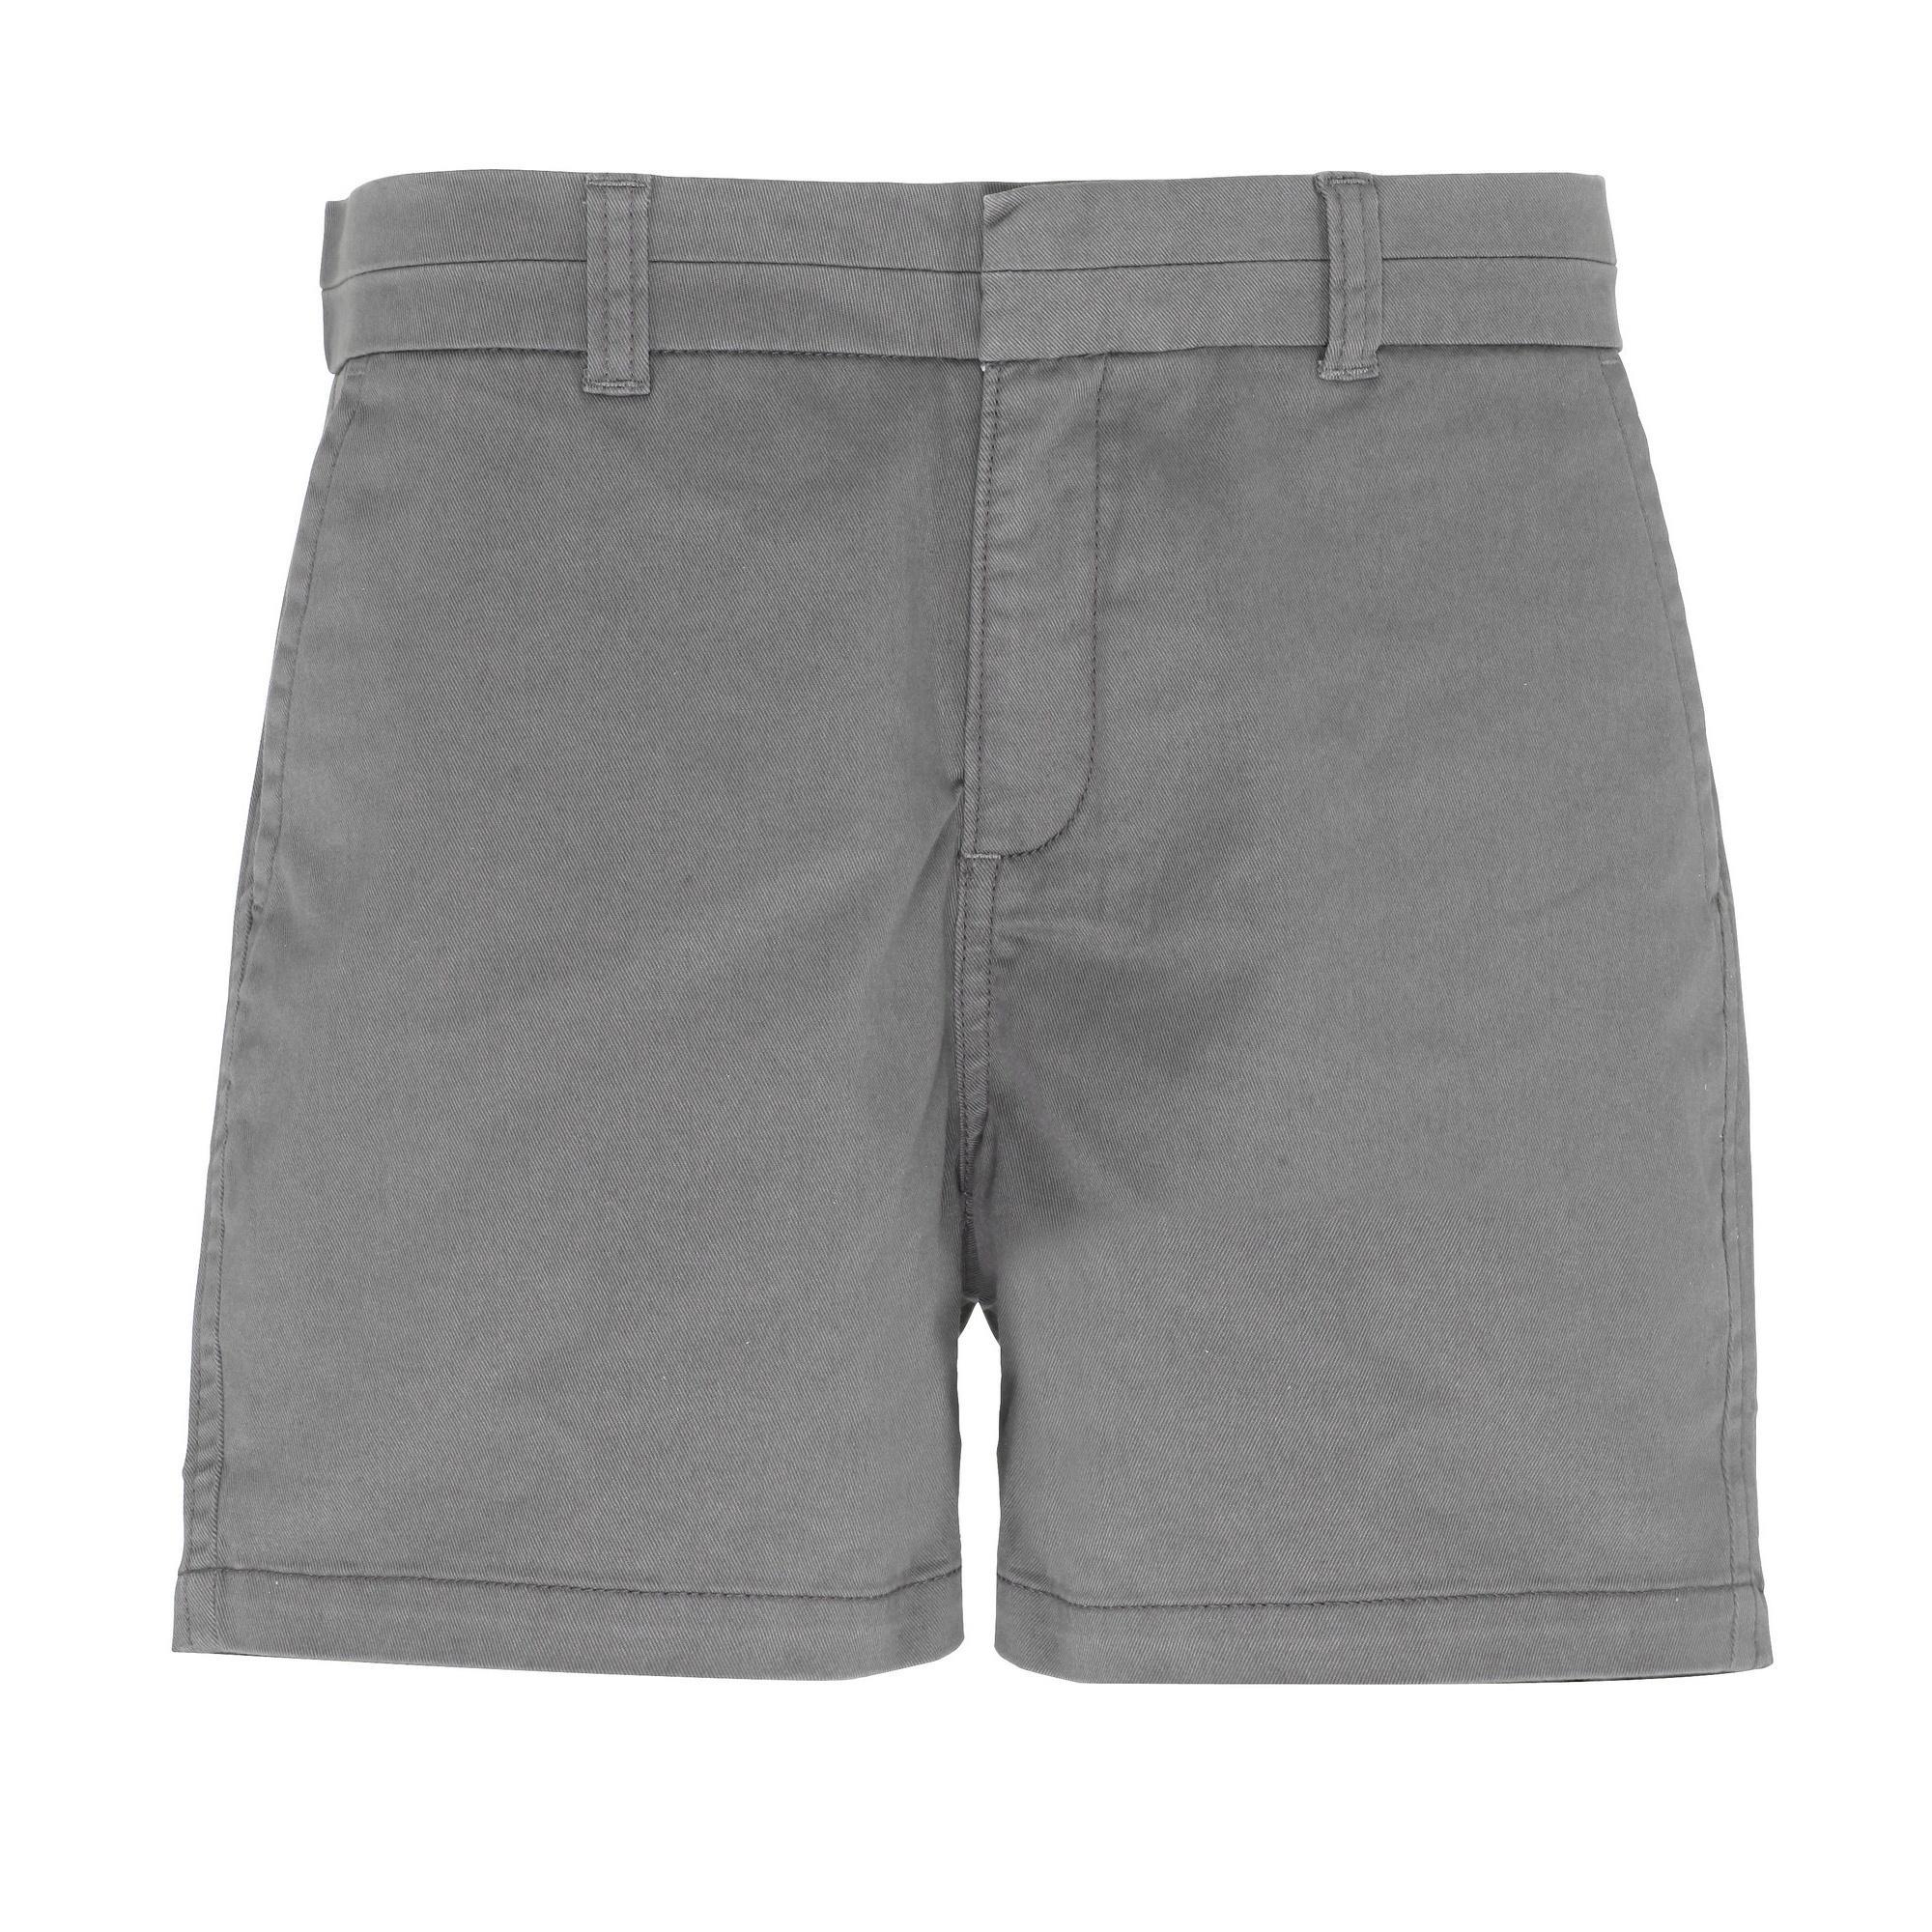 Asquith & Fox Womens/Ladies Classic Fit Shorts (Slate) (L)